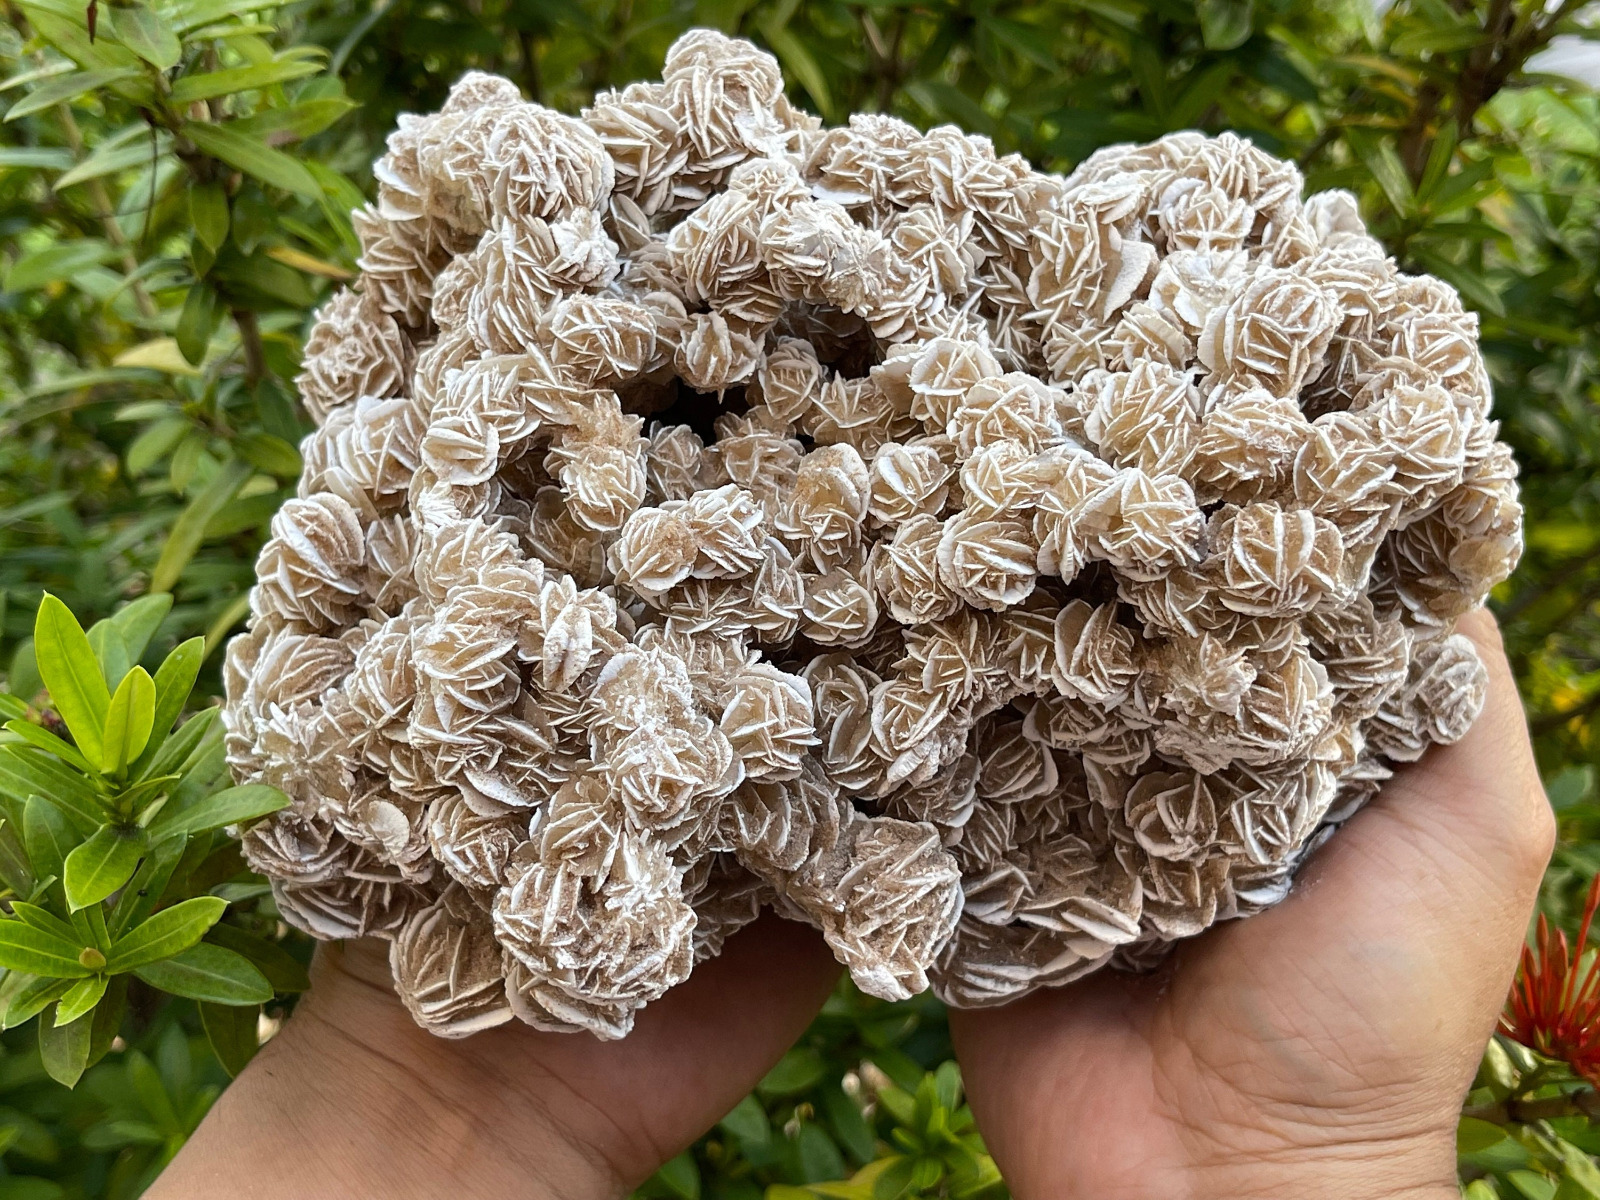 Large to Giant Desert Rose Cluster,3-10 Inches Beautiful Huge Desert Gypsum Rose